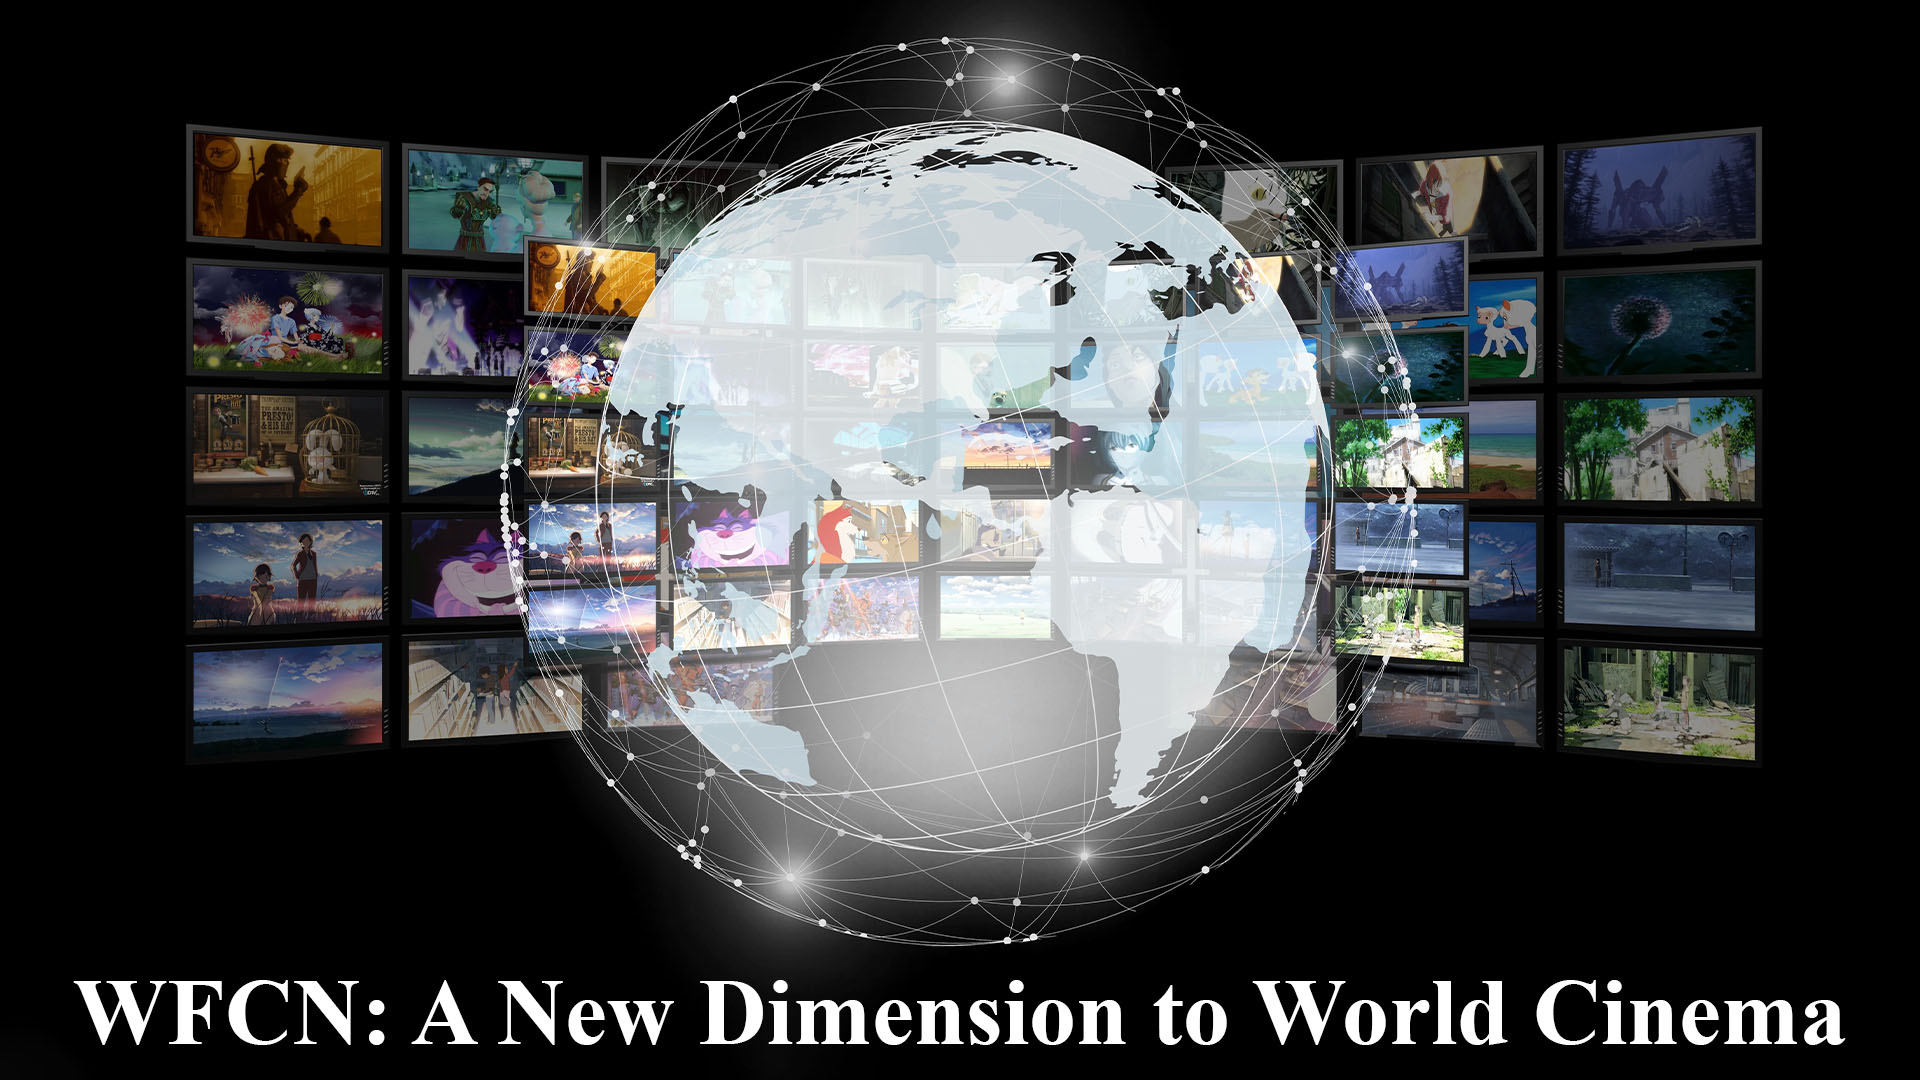 WFCN: A new dimension to world cinema